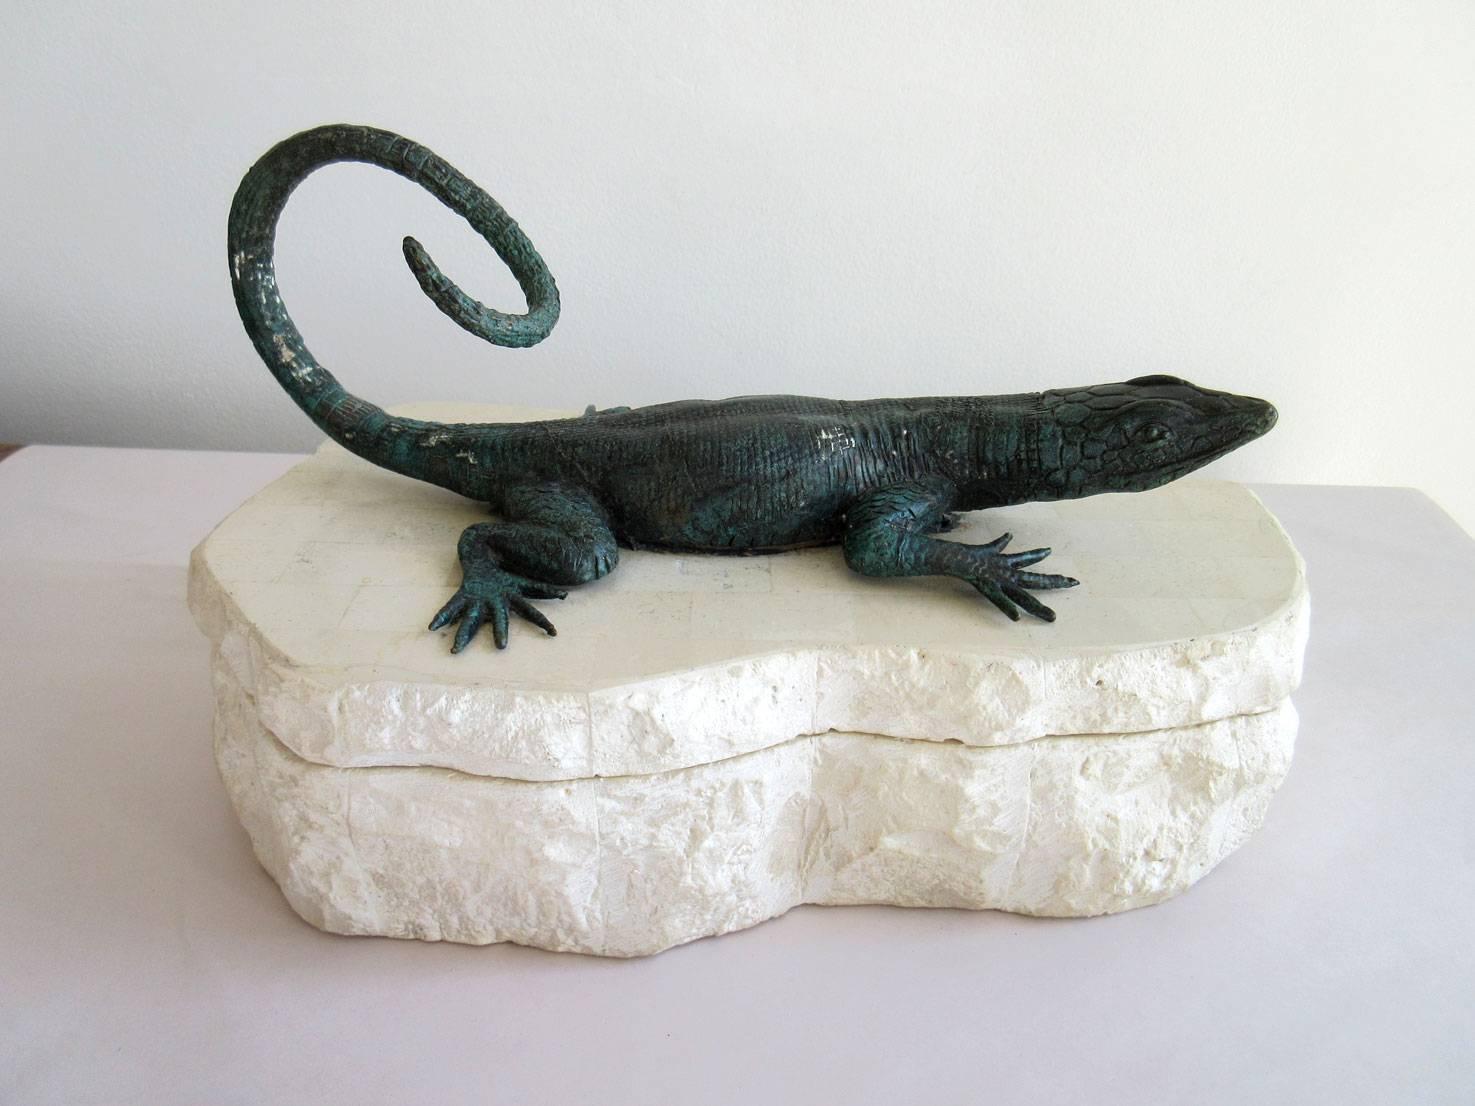 Vintage Maitland-Smith box made of stone with rough stone perimeter and a cast metal lizard on top.